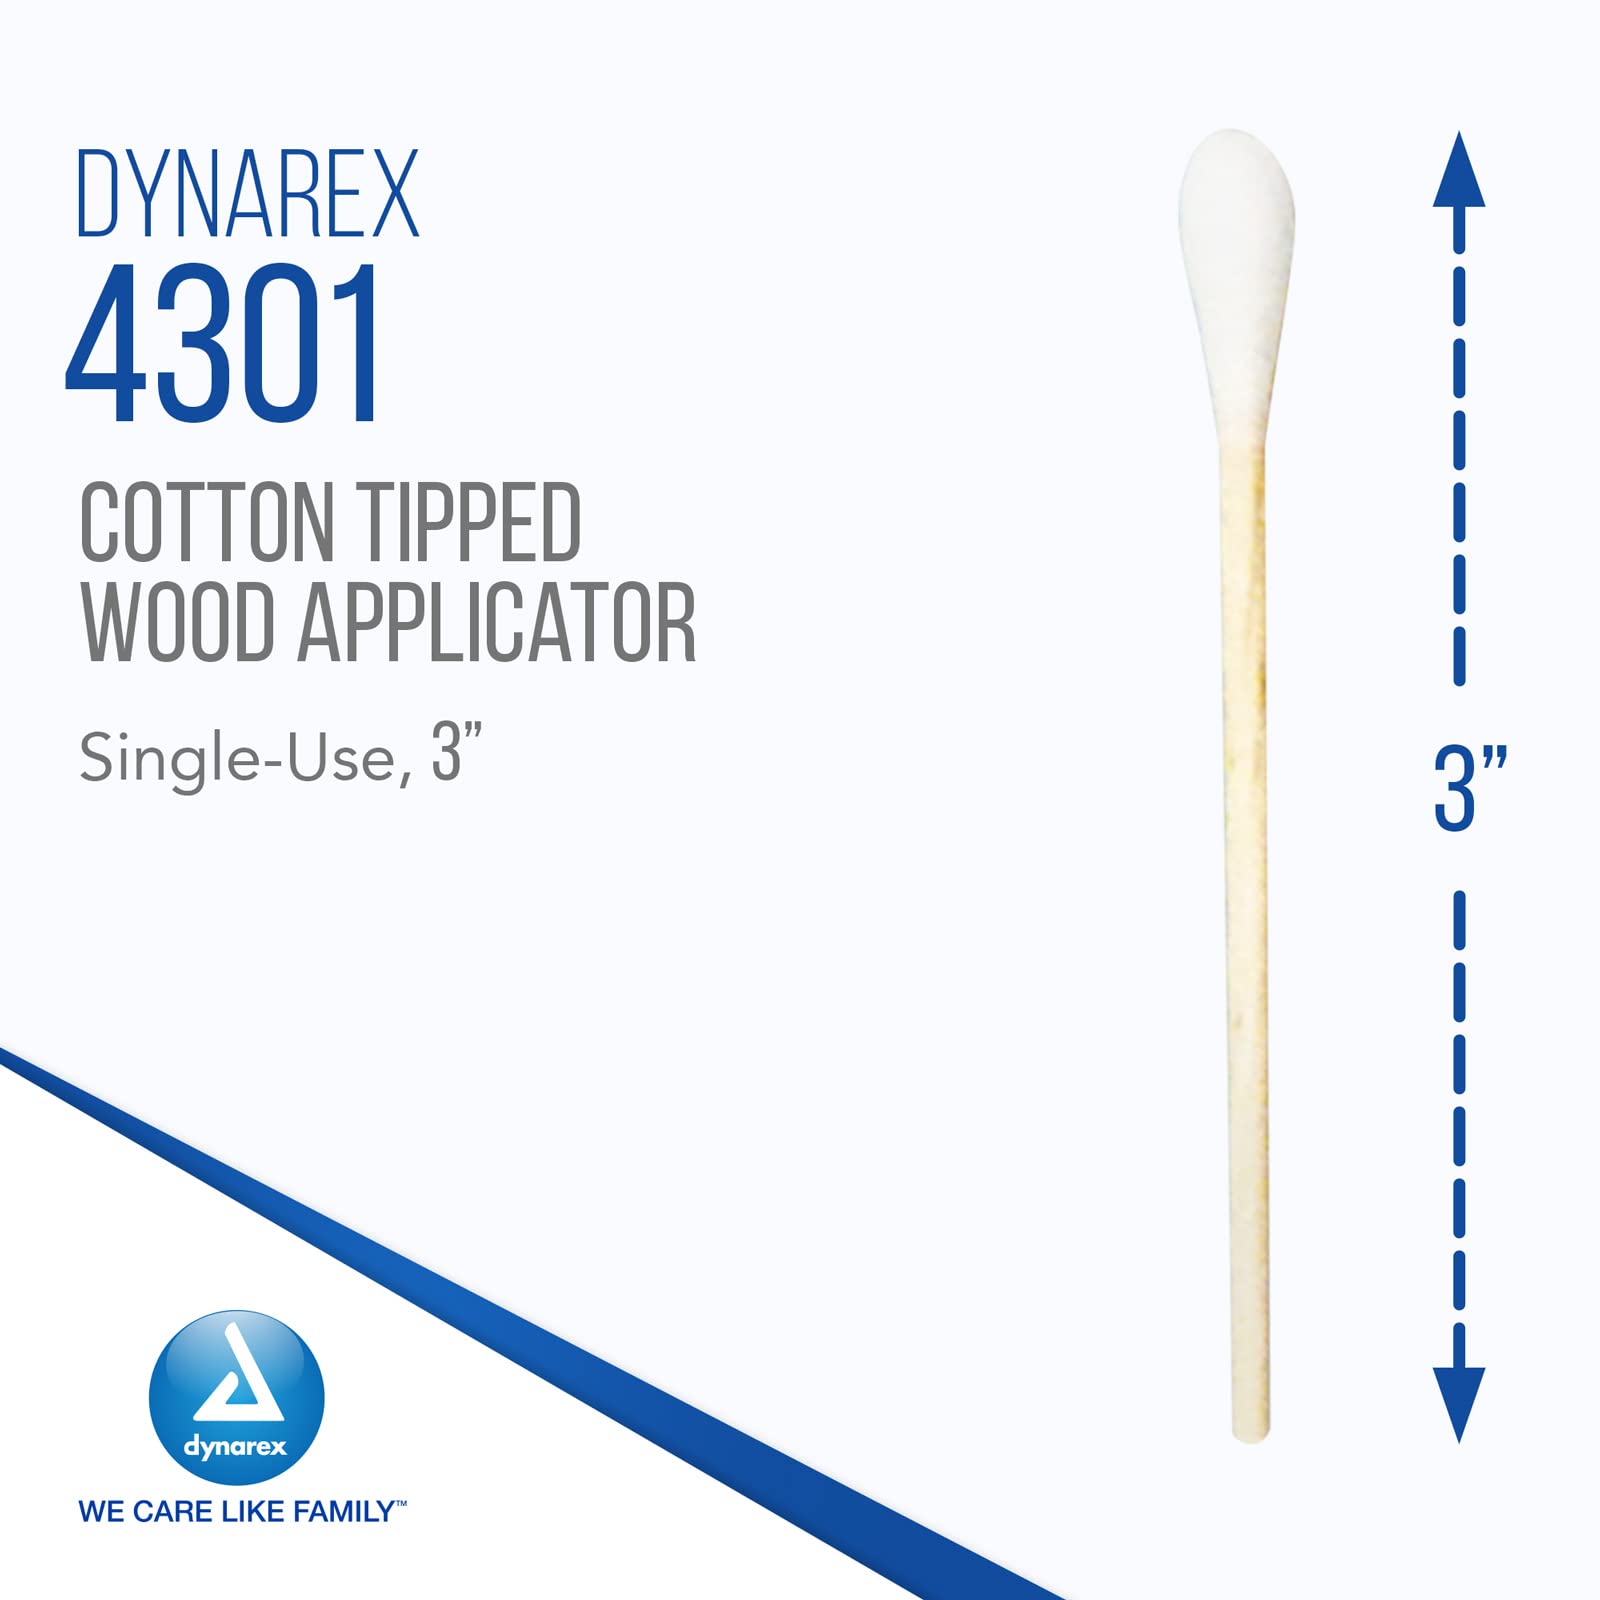 Dynarex 3-Inch Non-Sterile Cotton Tipped Applicators - Single-Use Wooden Cotton Tip Applicators for Wound Care, Hygiene, Makeup, Cleaning, Jewelry - 1000 per Box, 10 Boxes